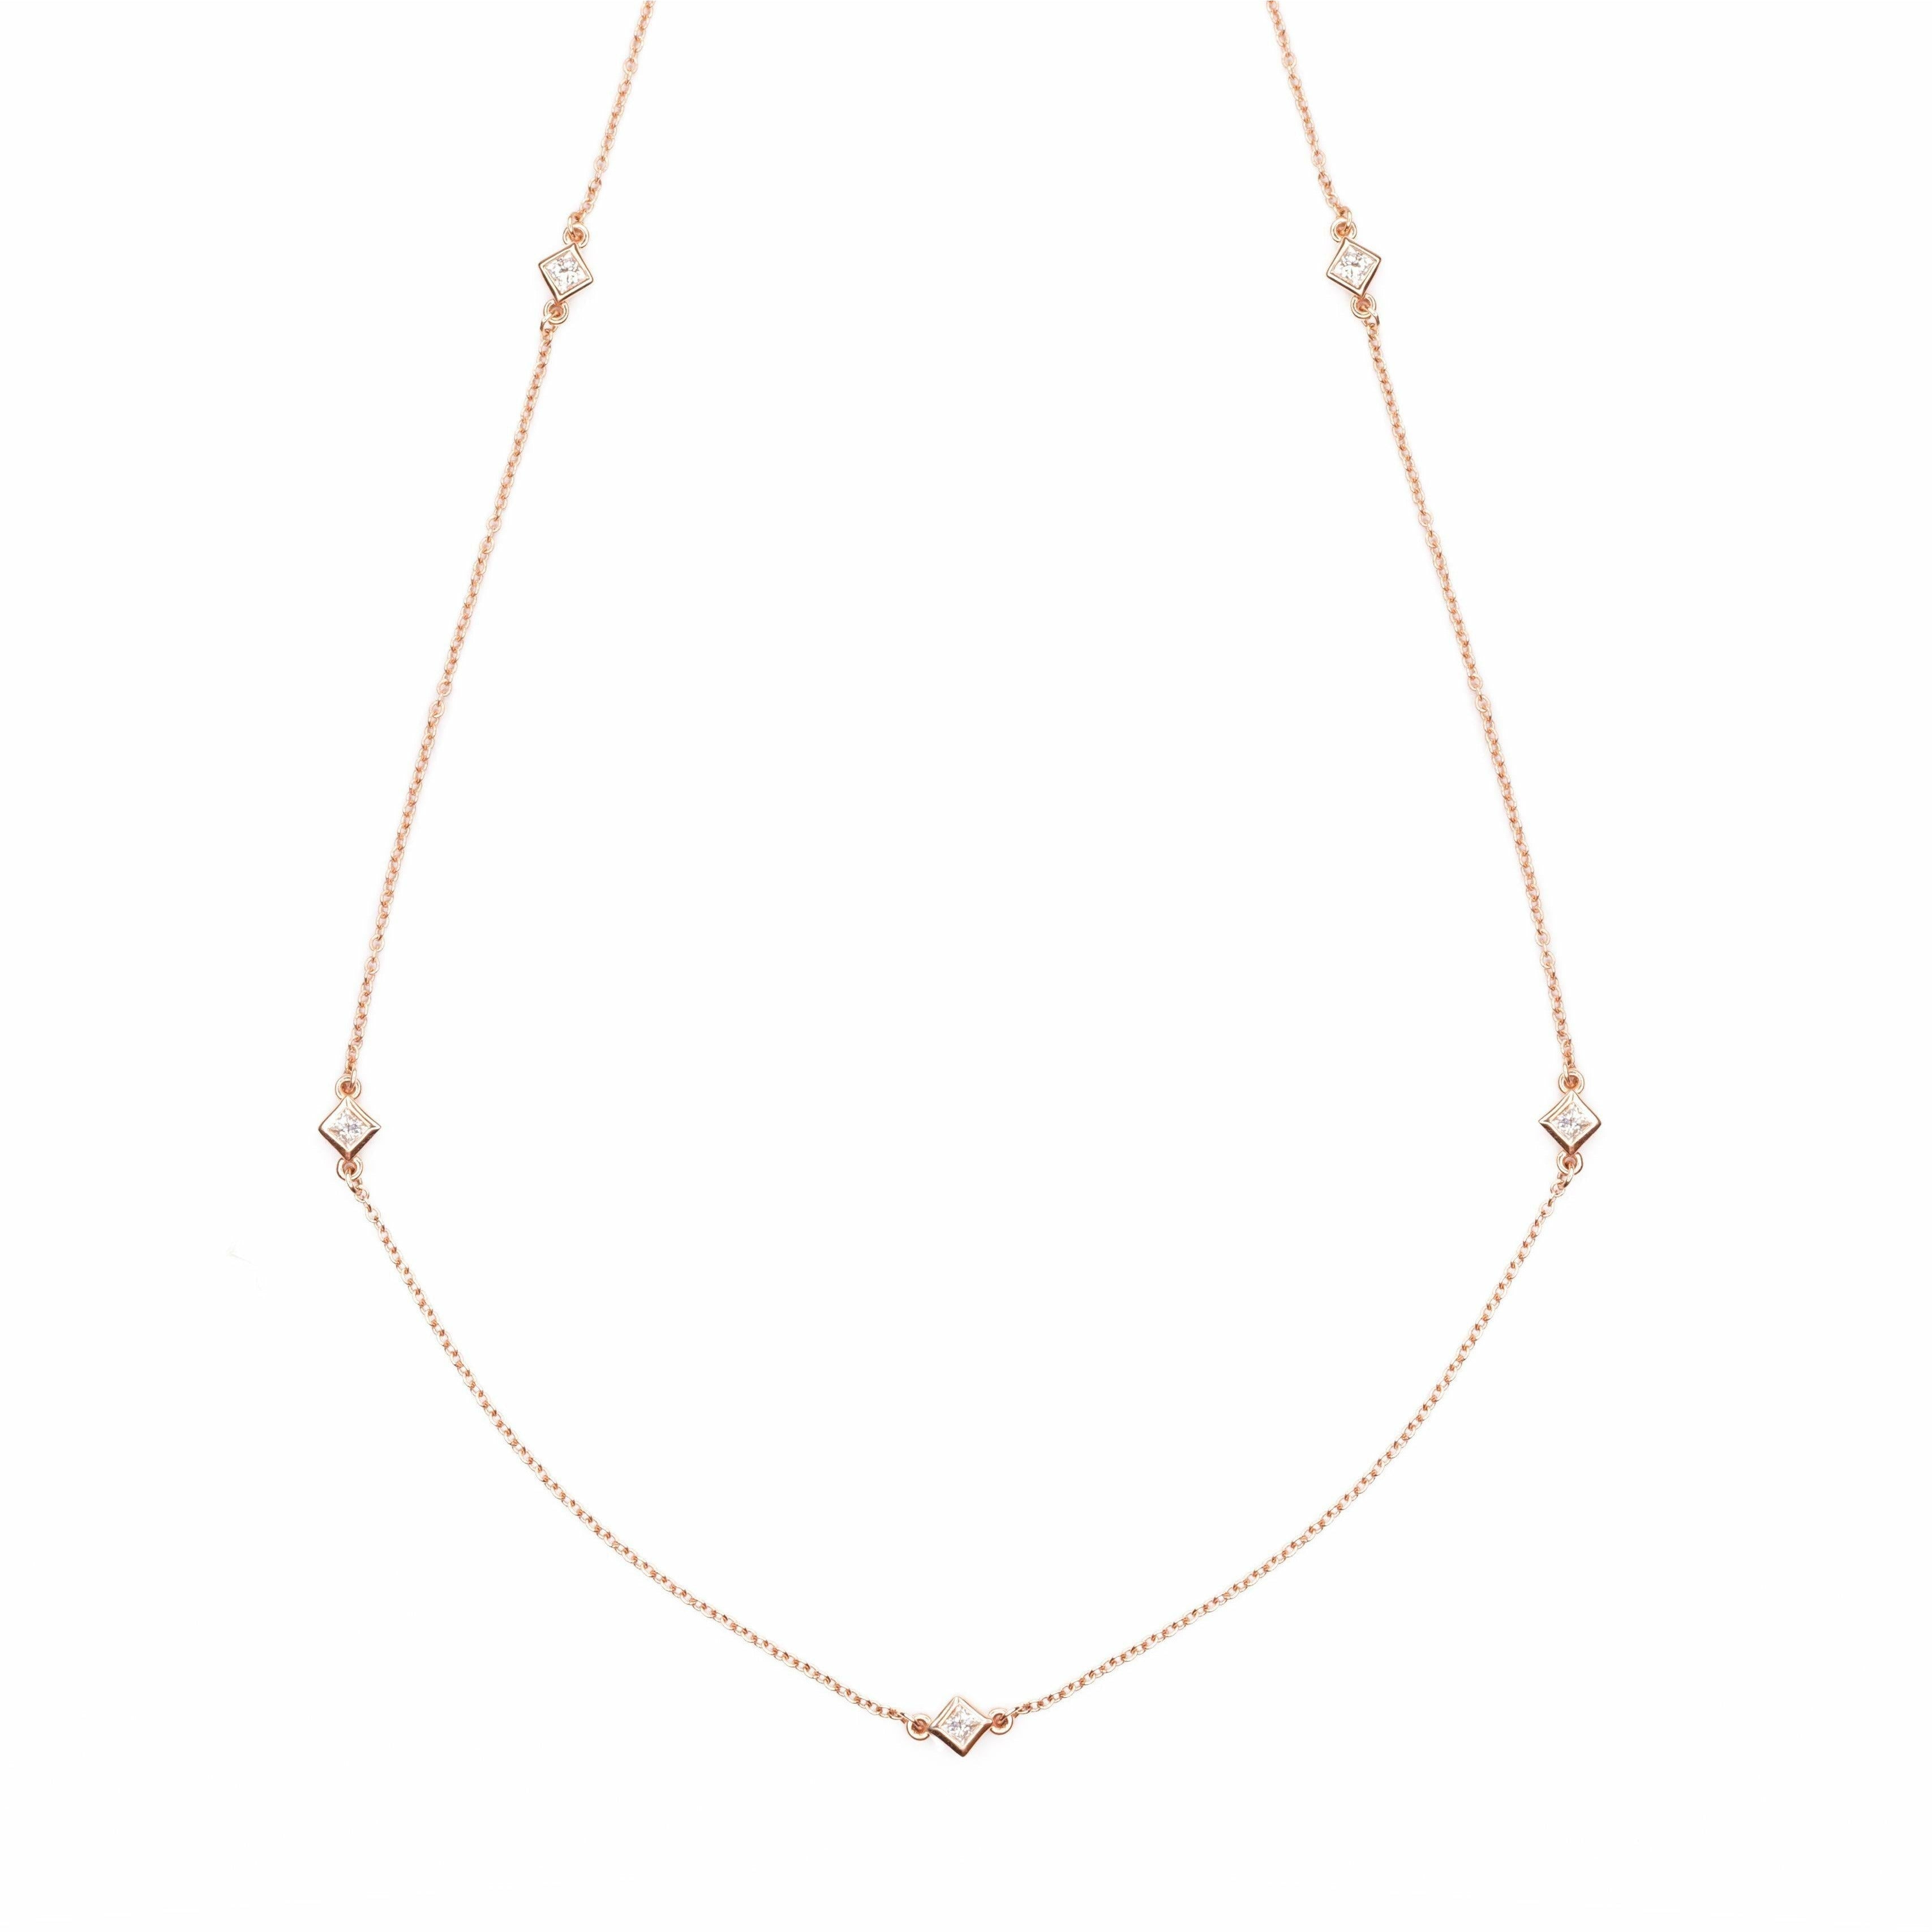 A Touch of Twinkle Necklace - Lumije New York